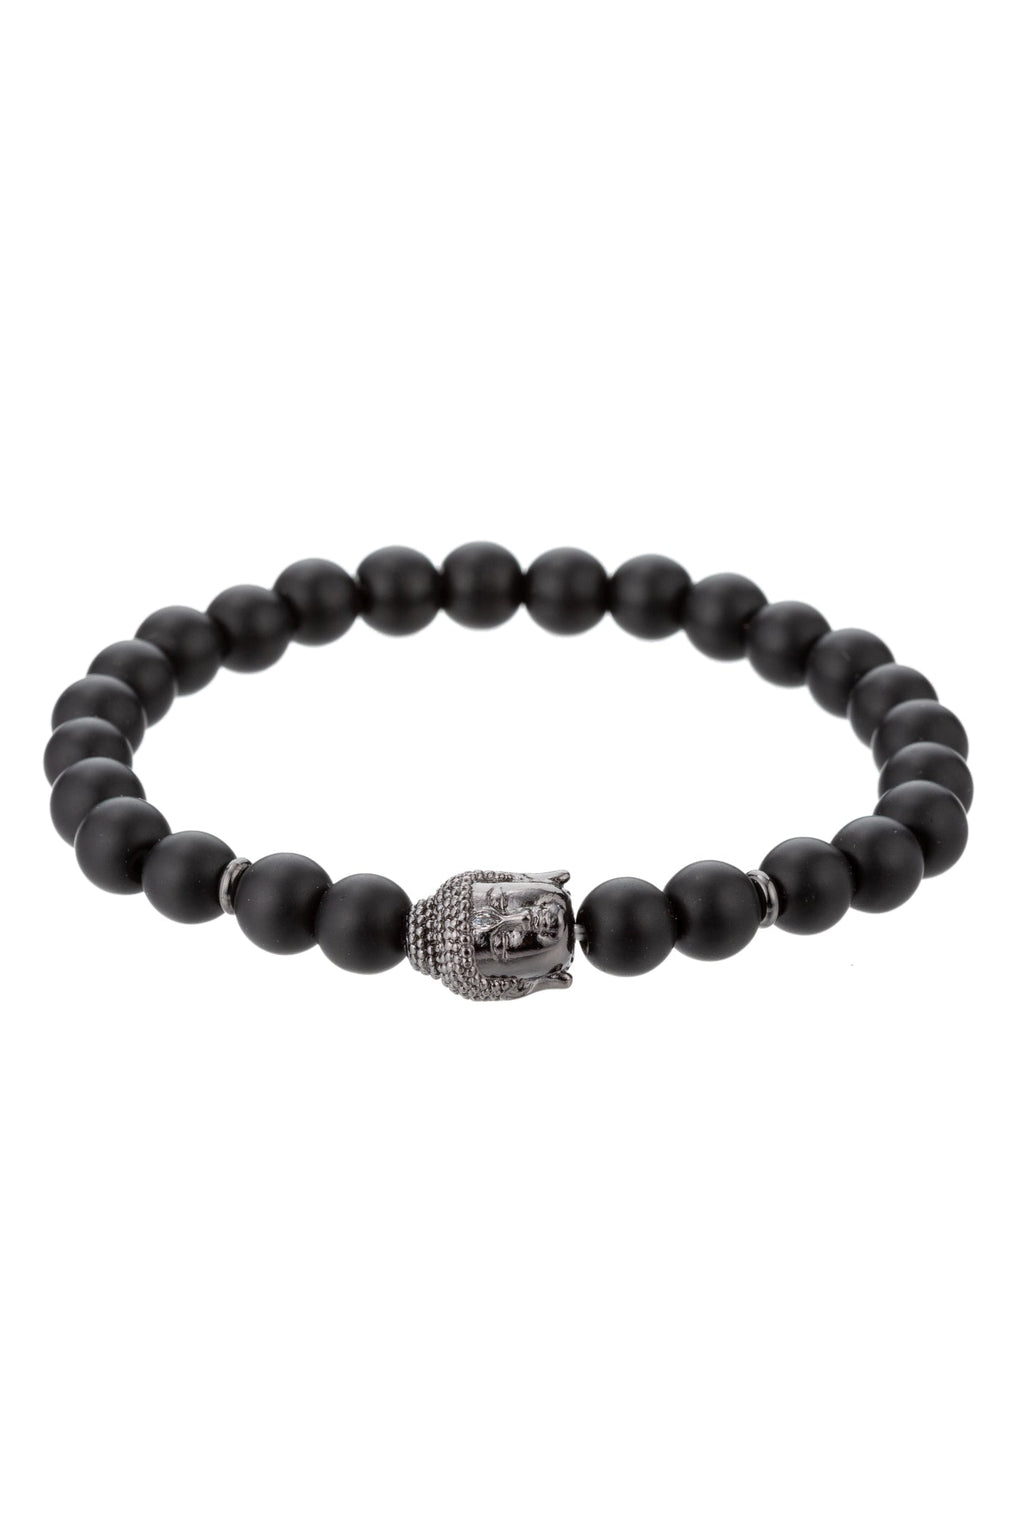 Discover Inner Peace and Balance with a Buddha Beaded Stretch Bracelet.